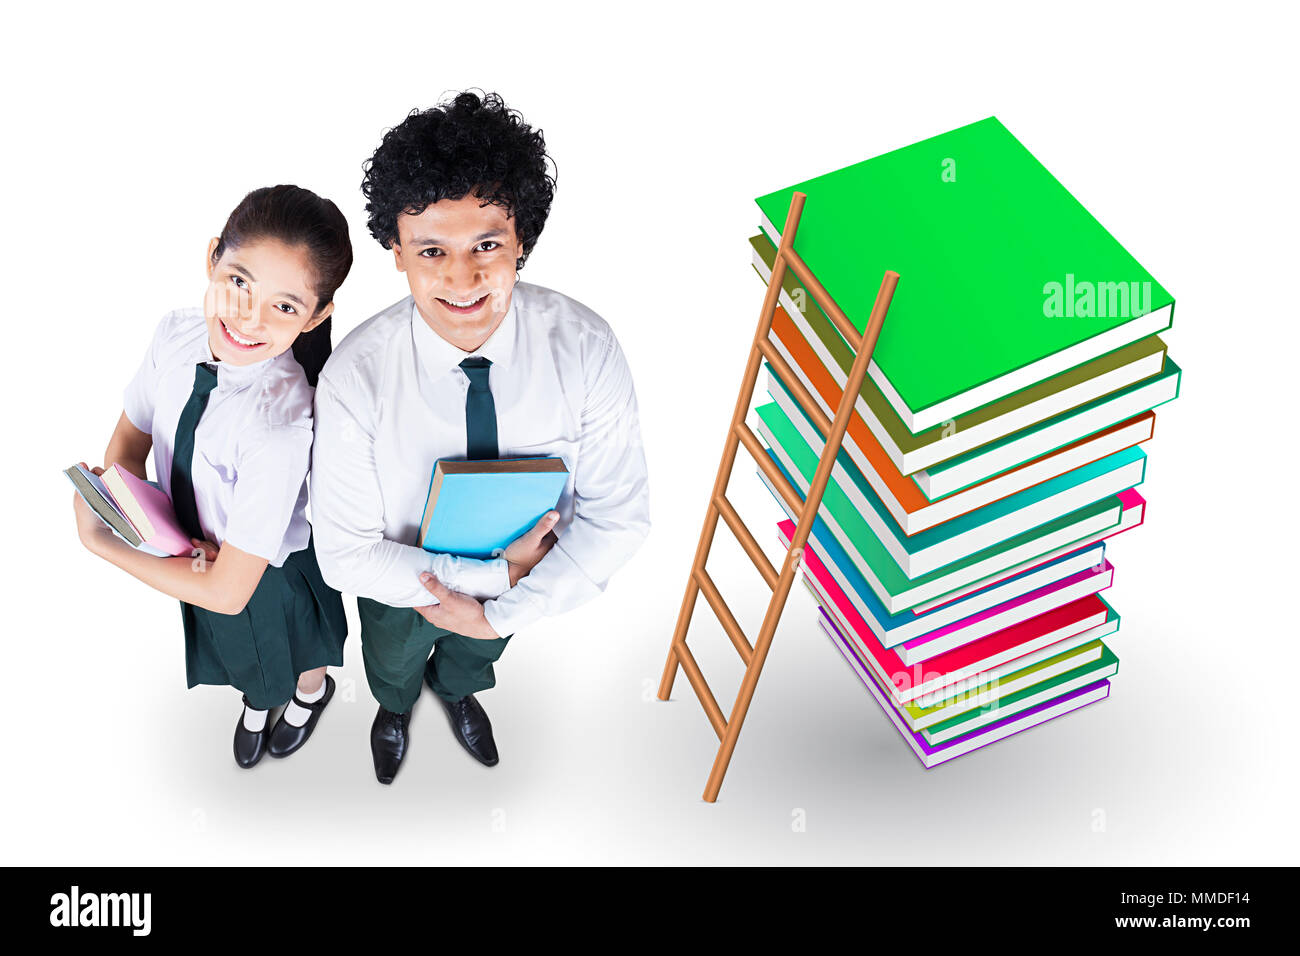 Two Young High School Students Friend Holding Books. Education Concept Stock Photo